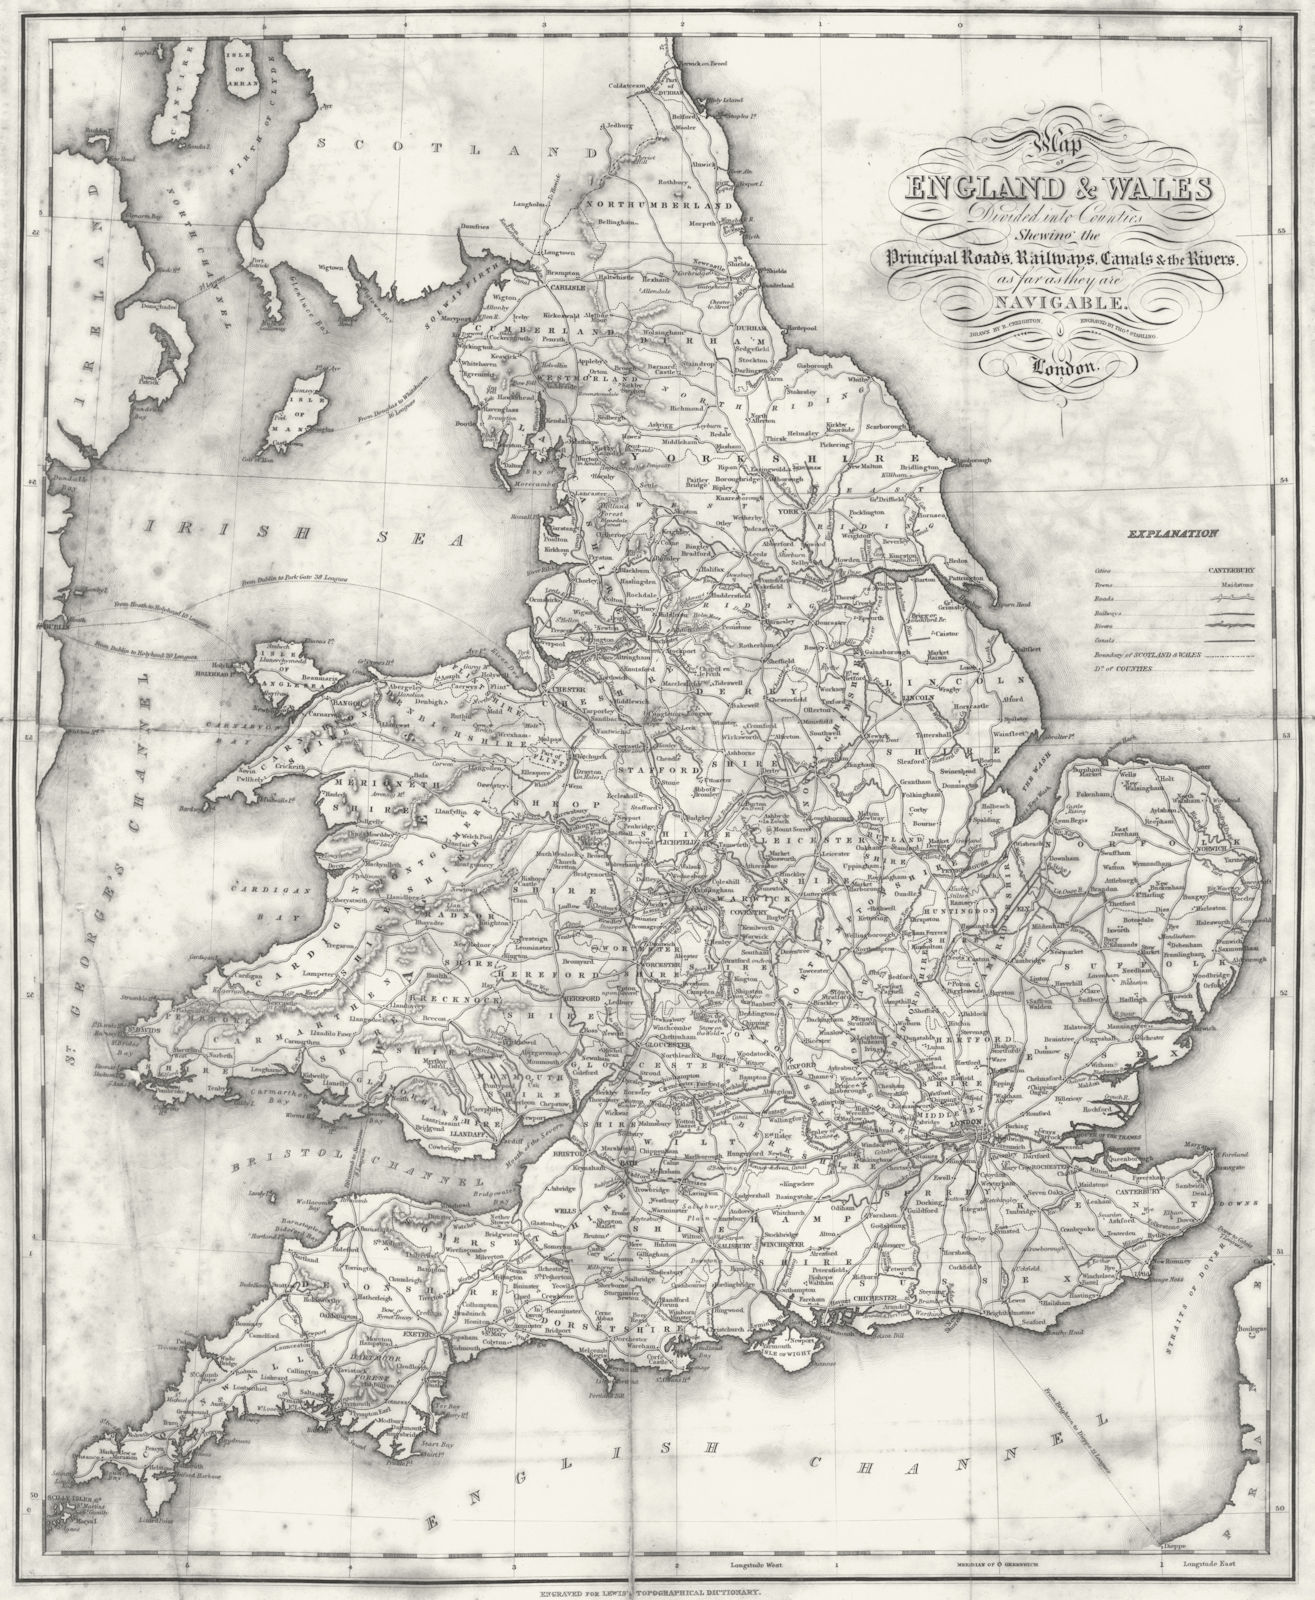 ENGLAND WALES. Roads, rail, canals, rivers. Lewis 1831 old antique map chart